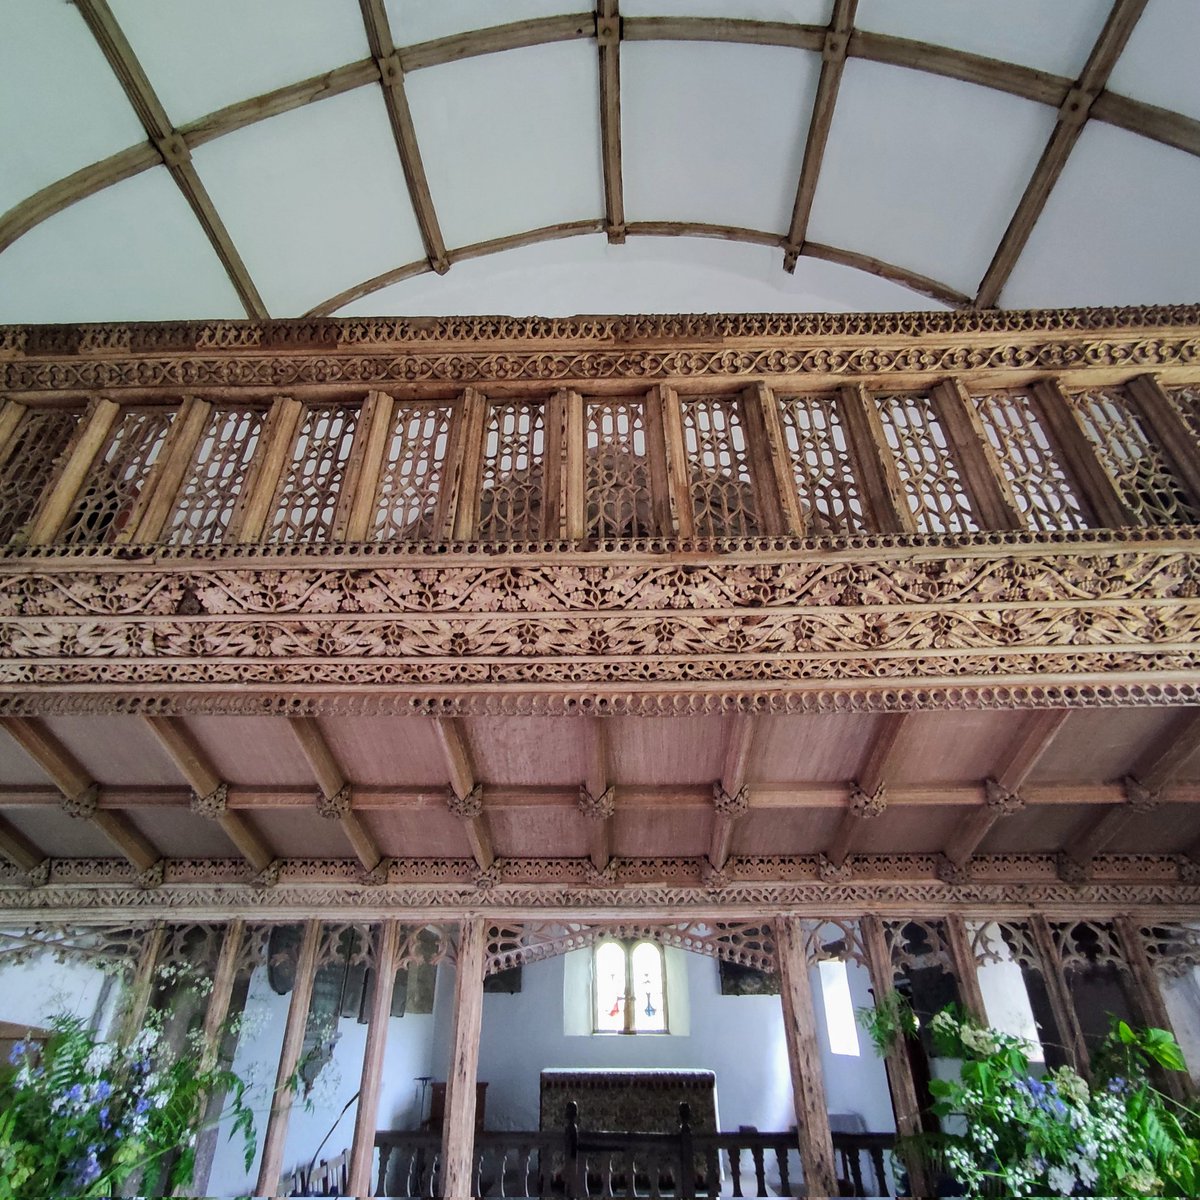 Taking the slow (and not always direct) road to Shropshire, we found ourselves near Patricio (alt sp. Partrishow) and the church and shrine of St. Issui. The church retains its early C16 rood screen, intricately carved in oak. #ScreenSaturday